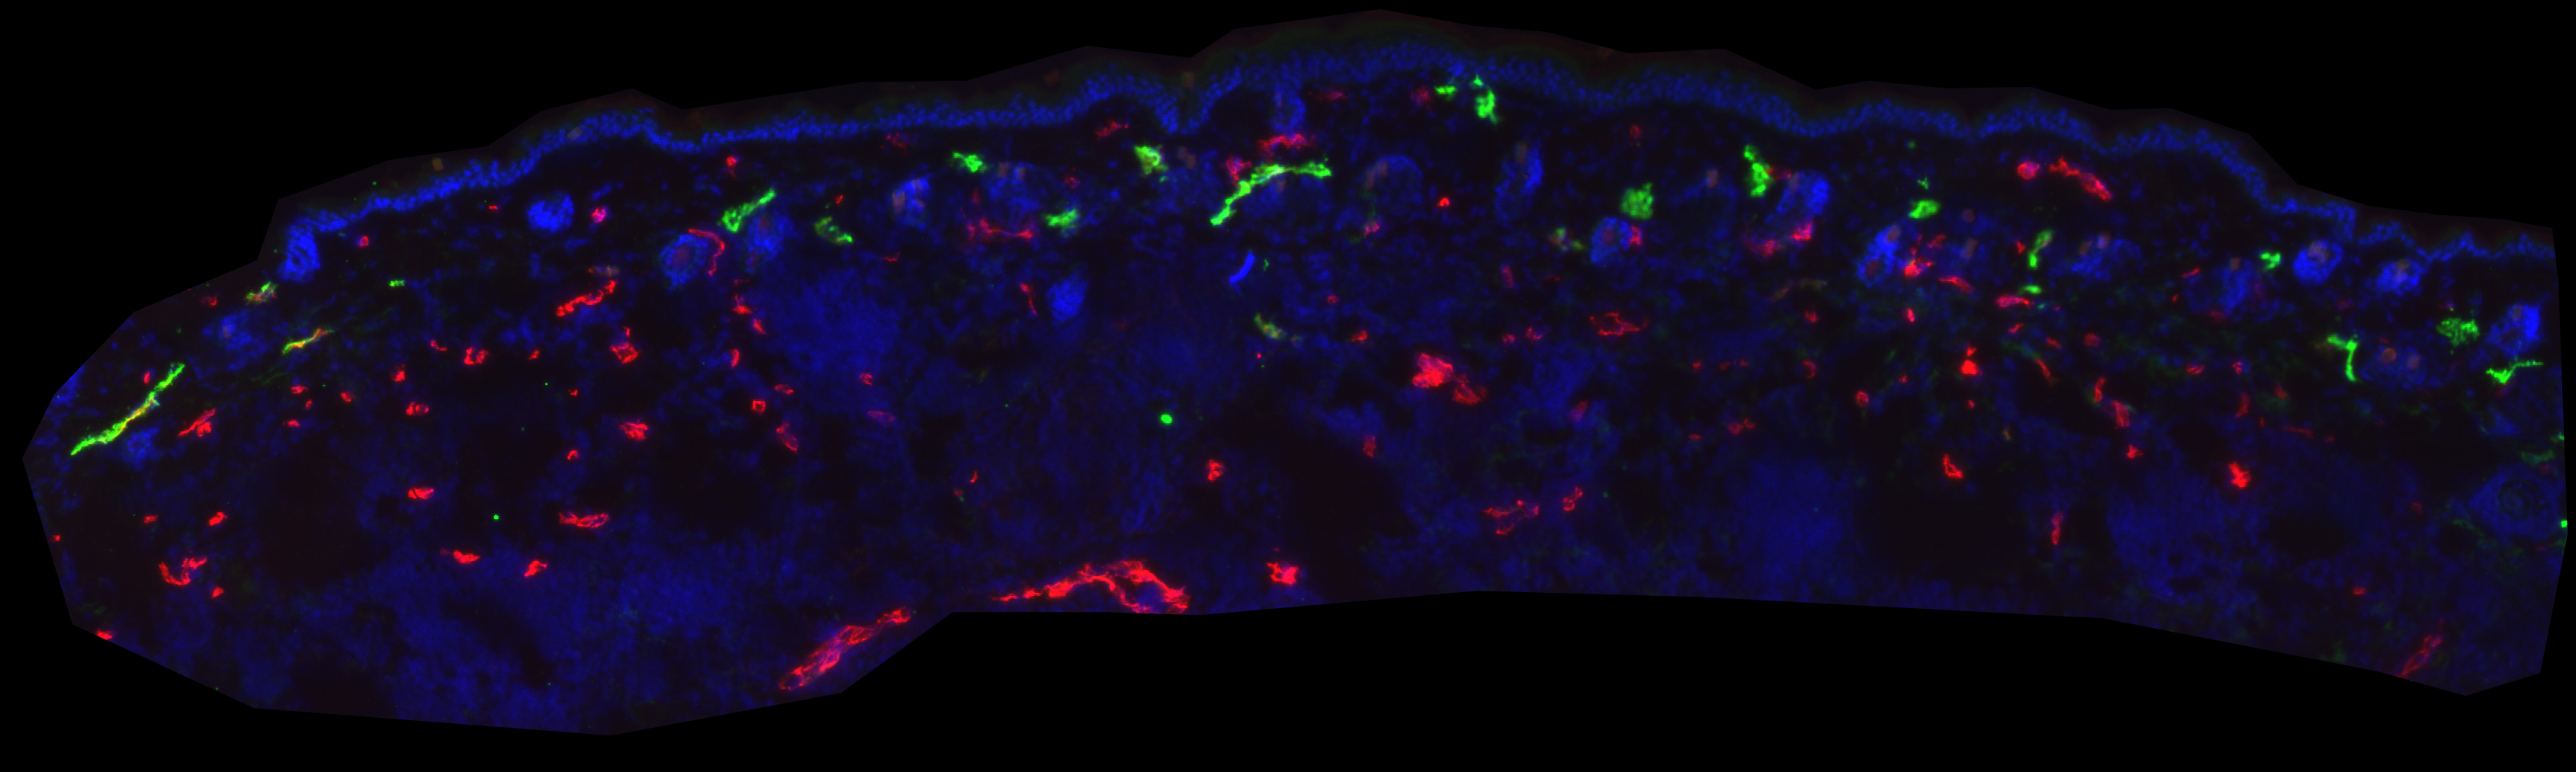 Lymphatic vessels in skin labelled with LYVE-1 (green), CD31 (red), DAPI (blue)